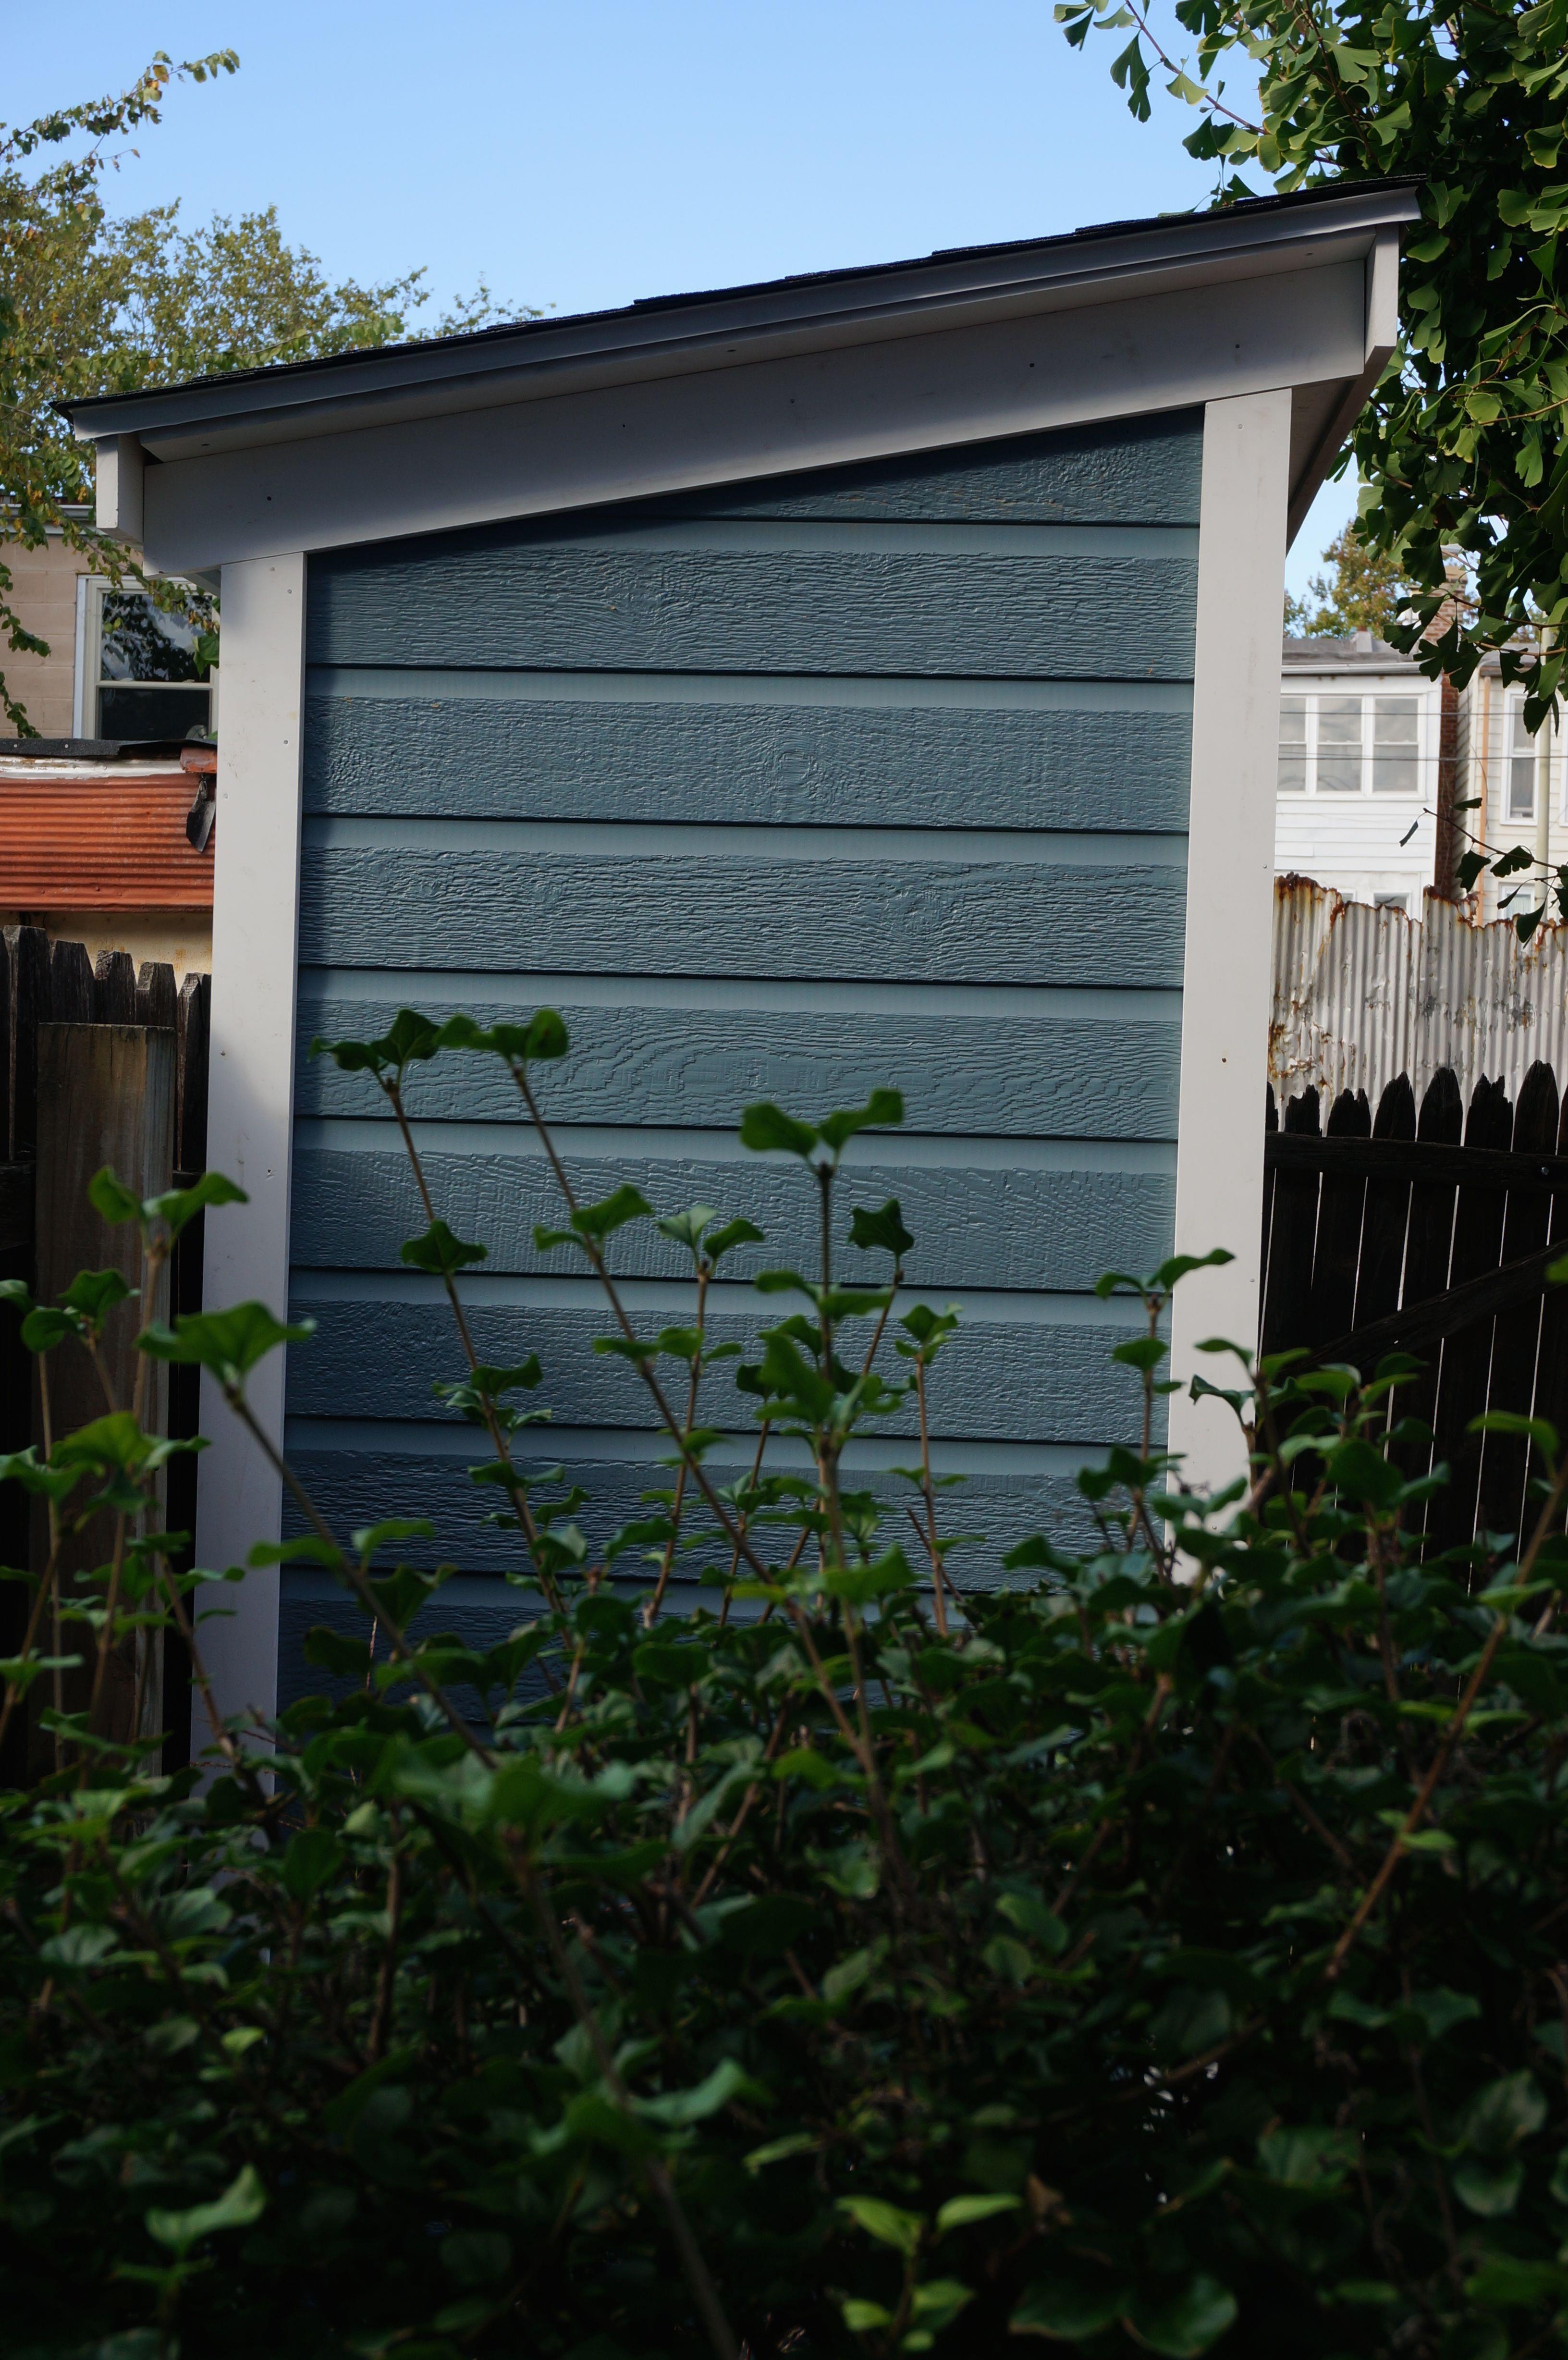 Canexel blue Sarawak shed 3x6 with concealed single door in Washington DC. ID number 181389-2